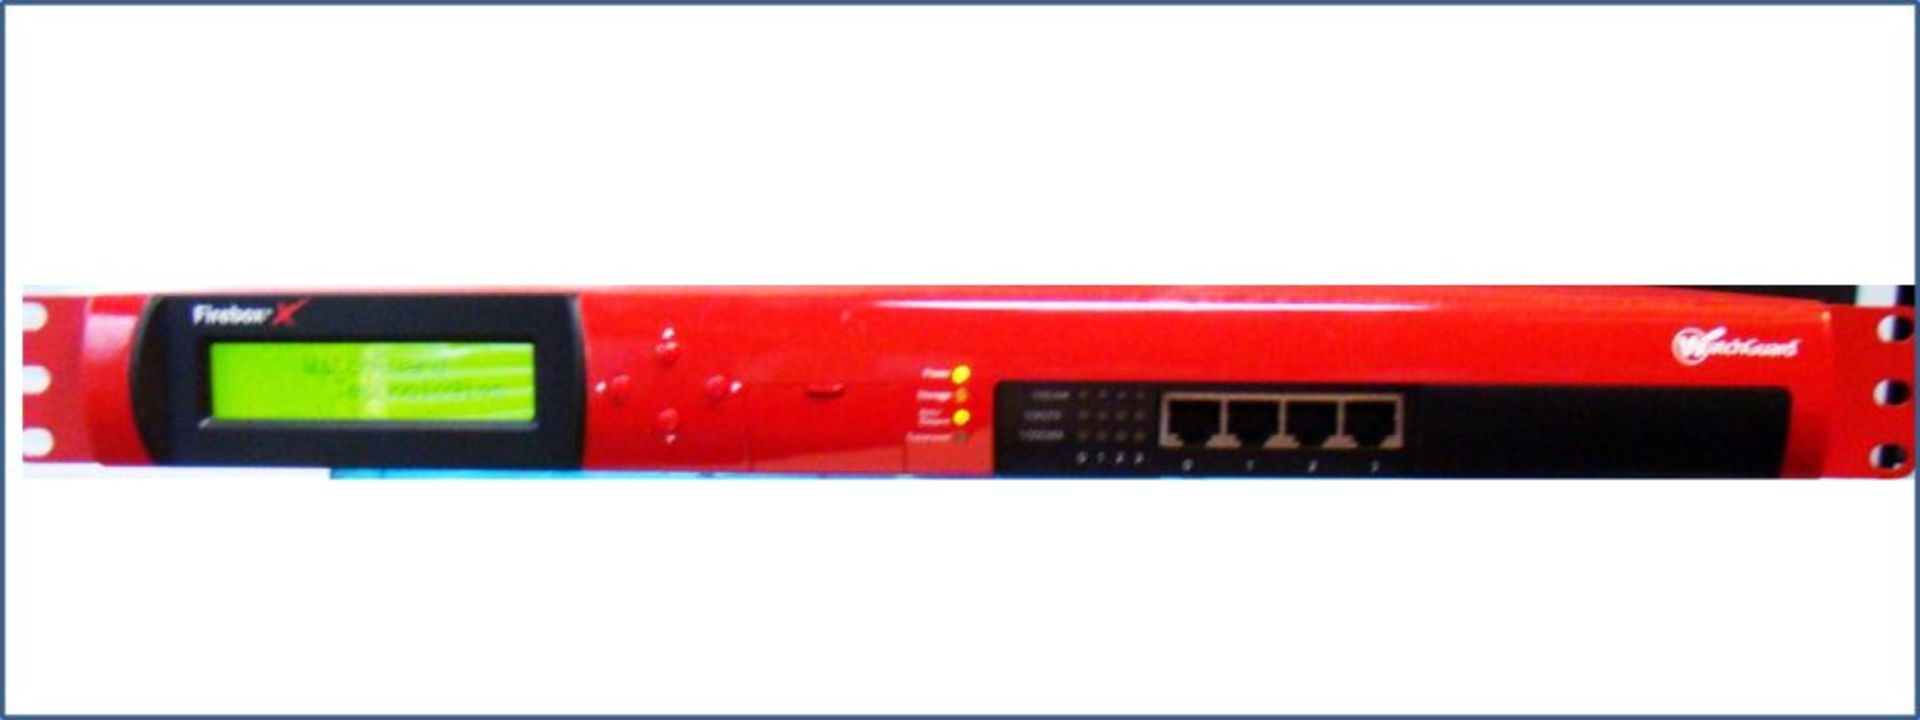 Used Condition, Ex Data Centre . Firebox® X Core™ unified threat management (UTM) solution - Image 6 of 13